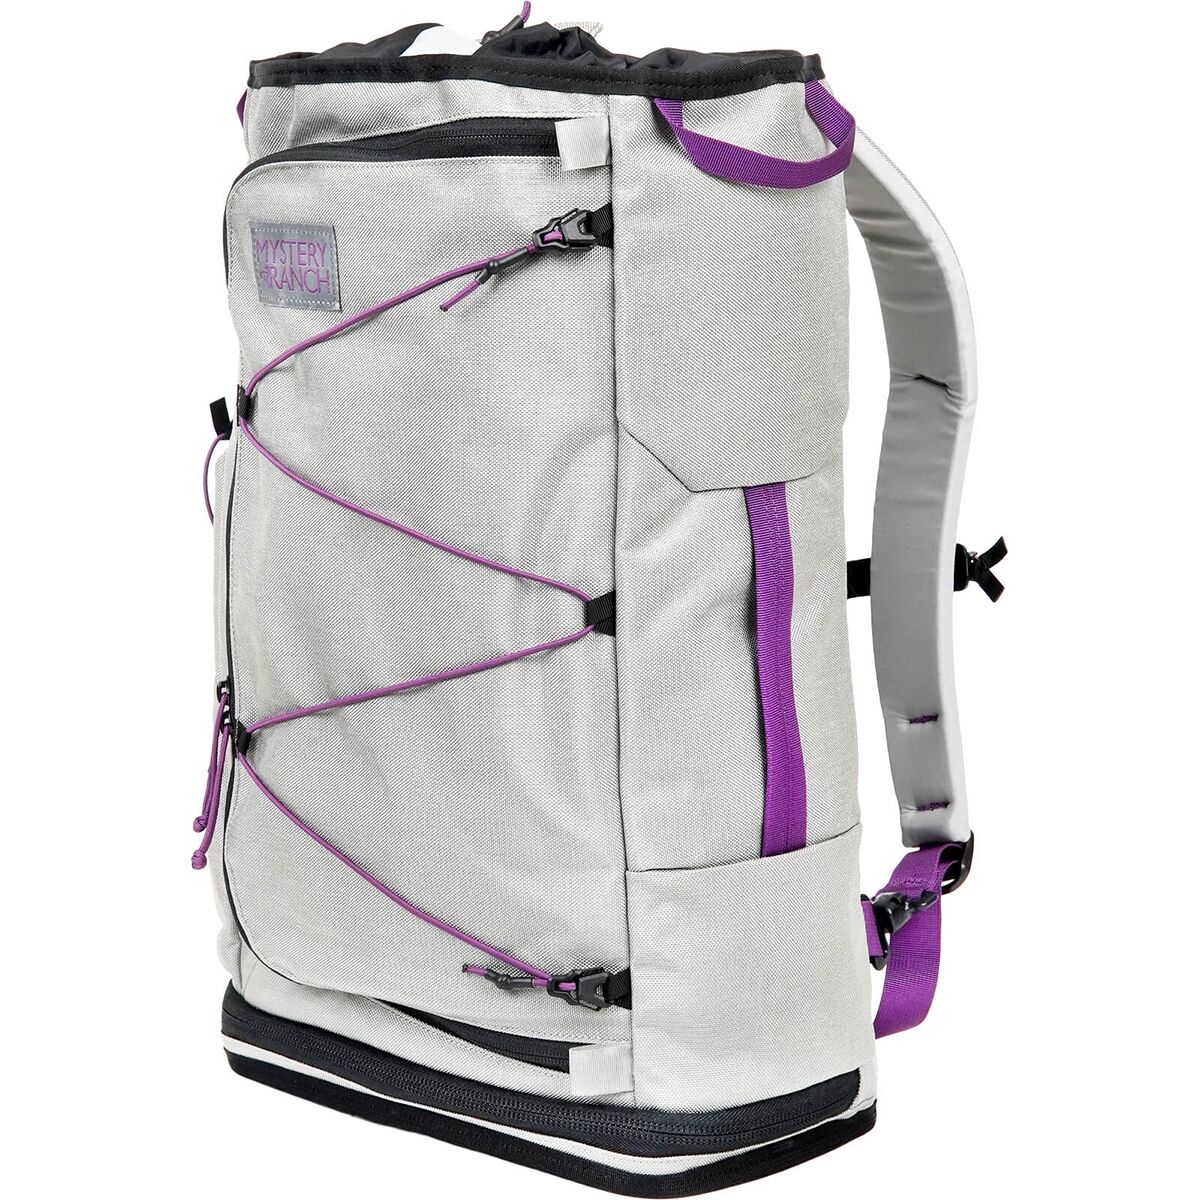 Photos - Backpack Mystery Ranch Superset 30L  